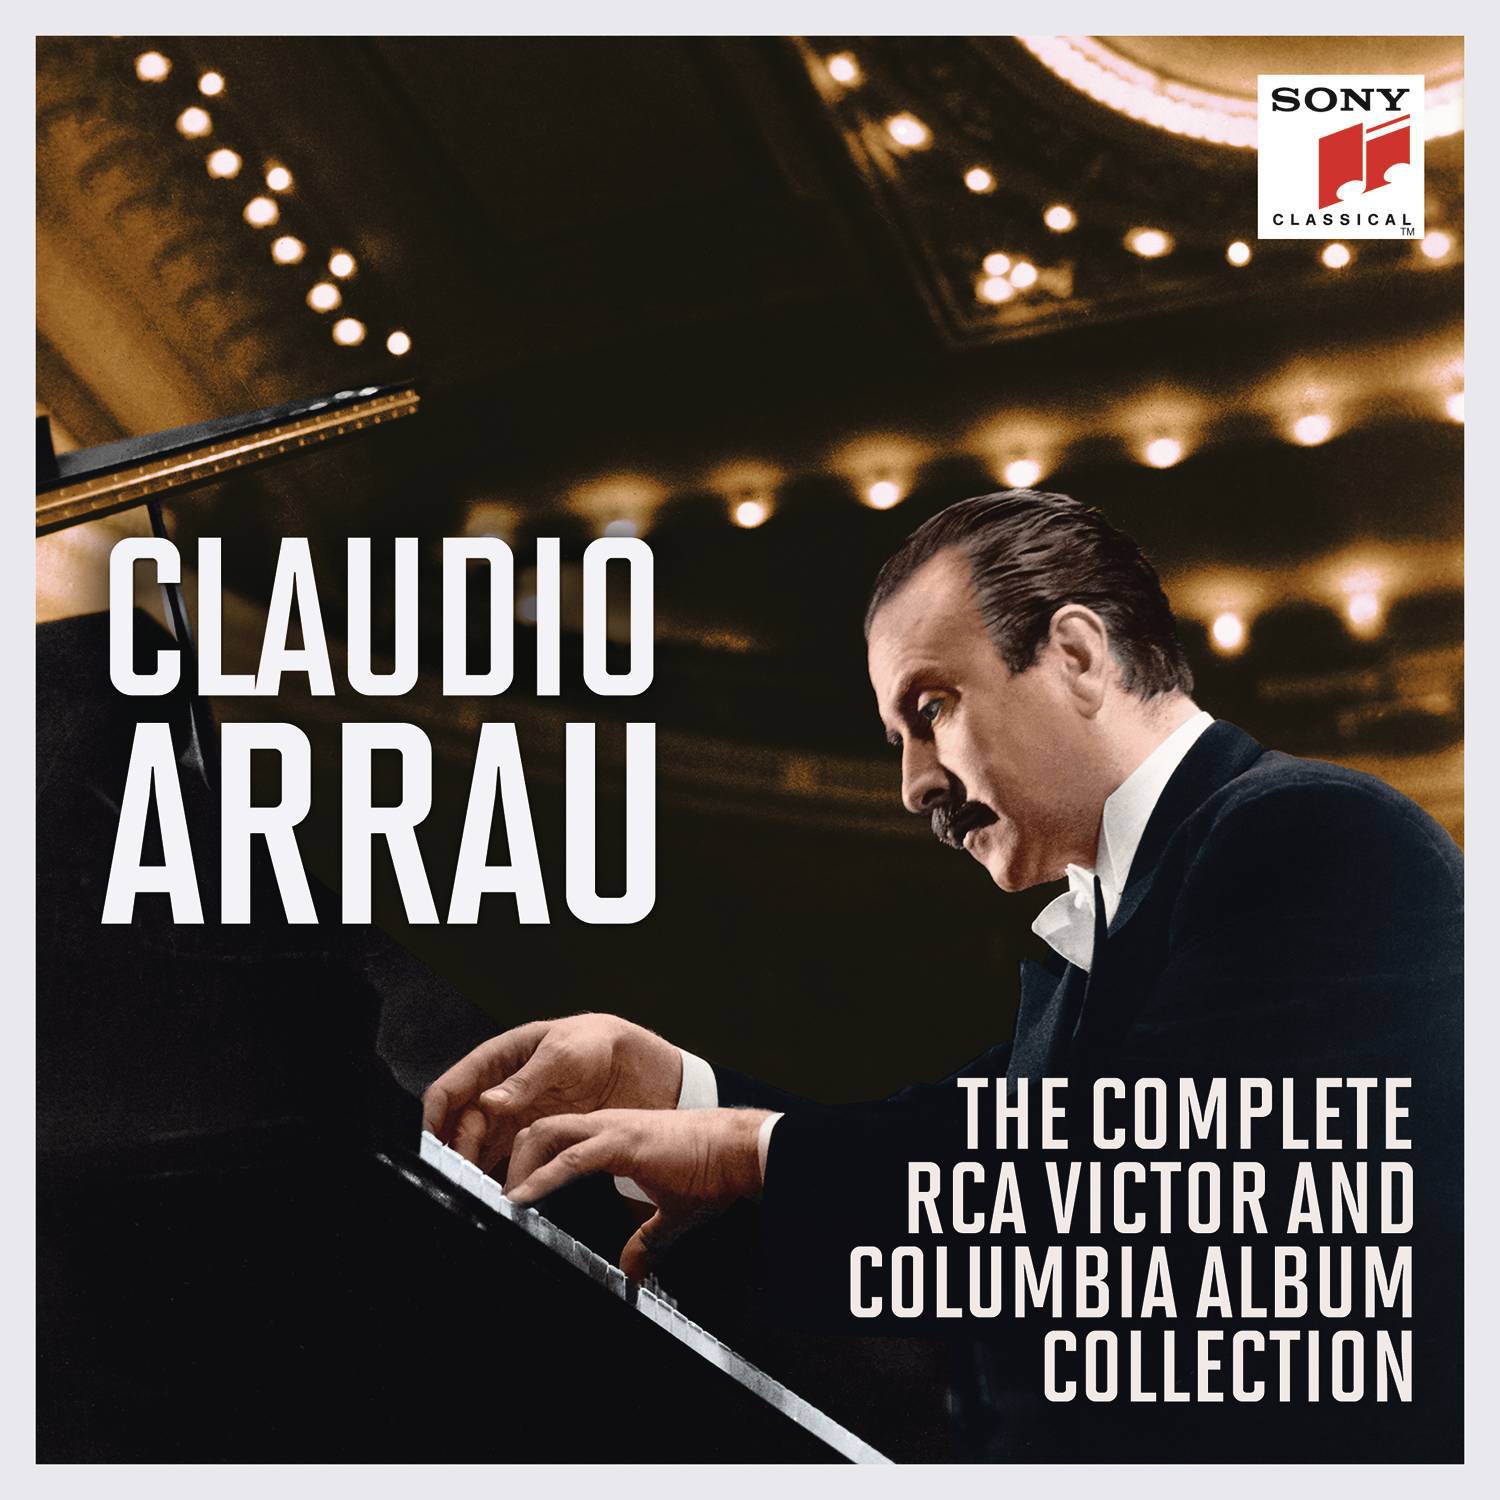 Claudio Arrau - The Complete RCA Victor and Columbia Album Collection专辑